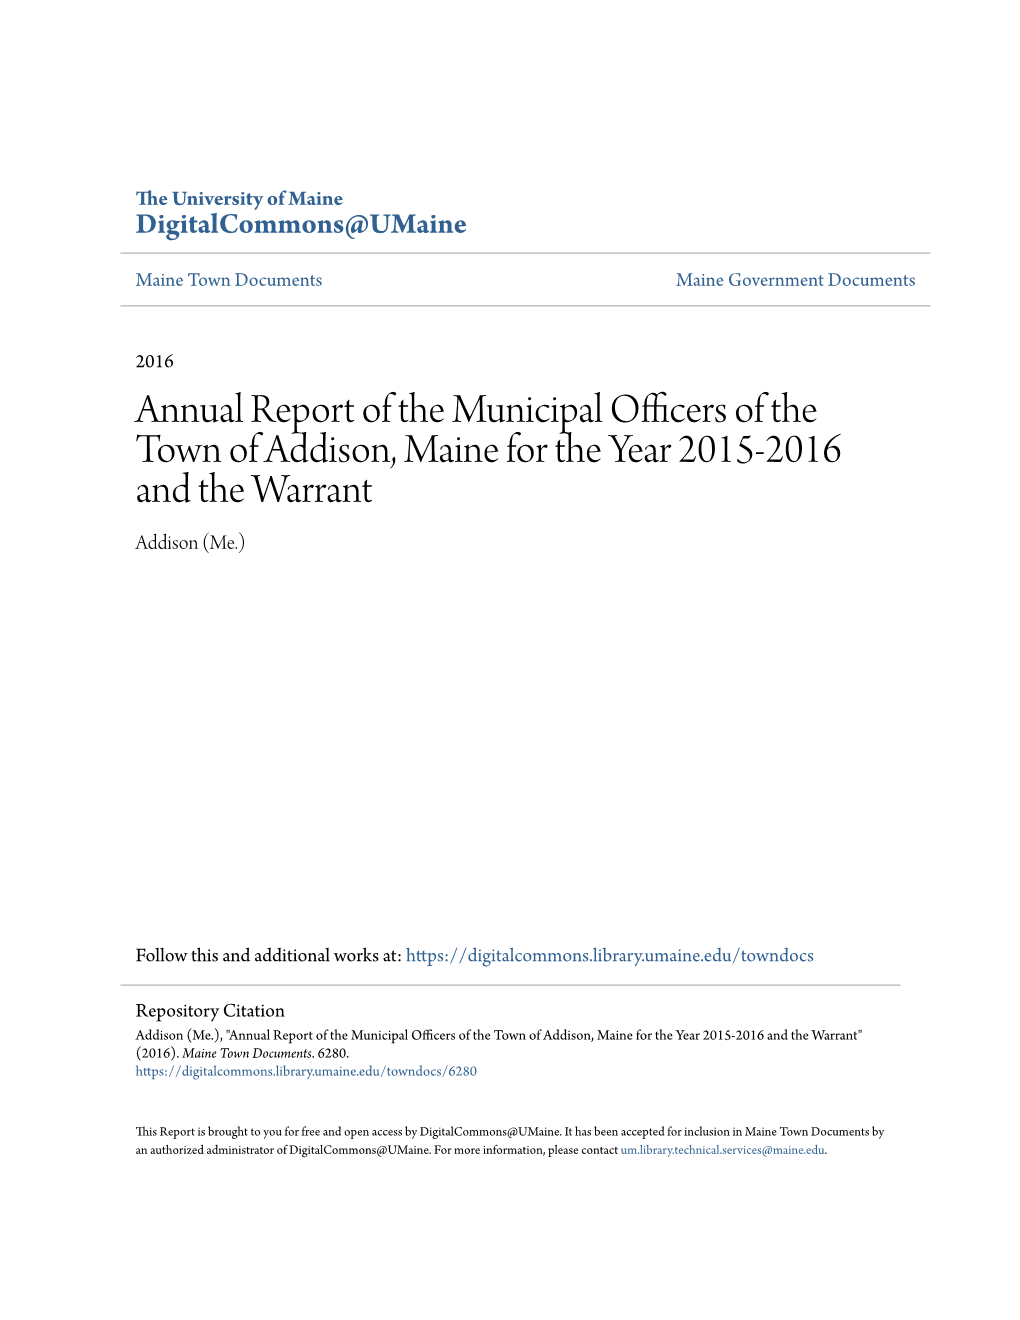 Annual Report of the Municipal Officers of the Town of Addison, Maine for the Year 2015-2016 and the Warrant Addison (Me.)